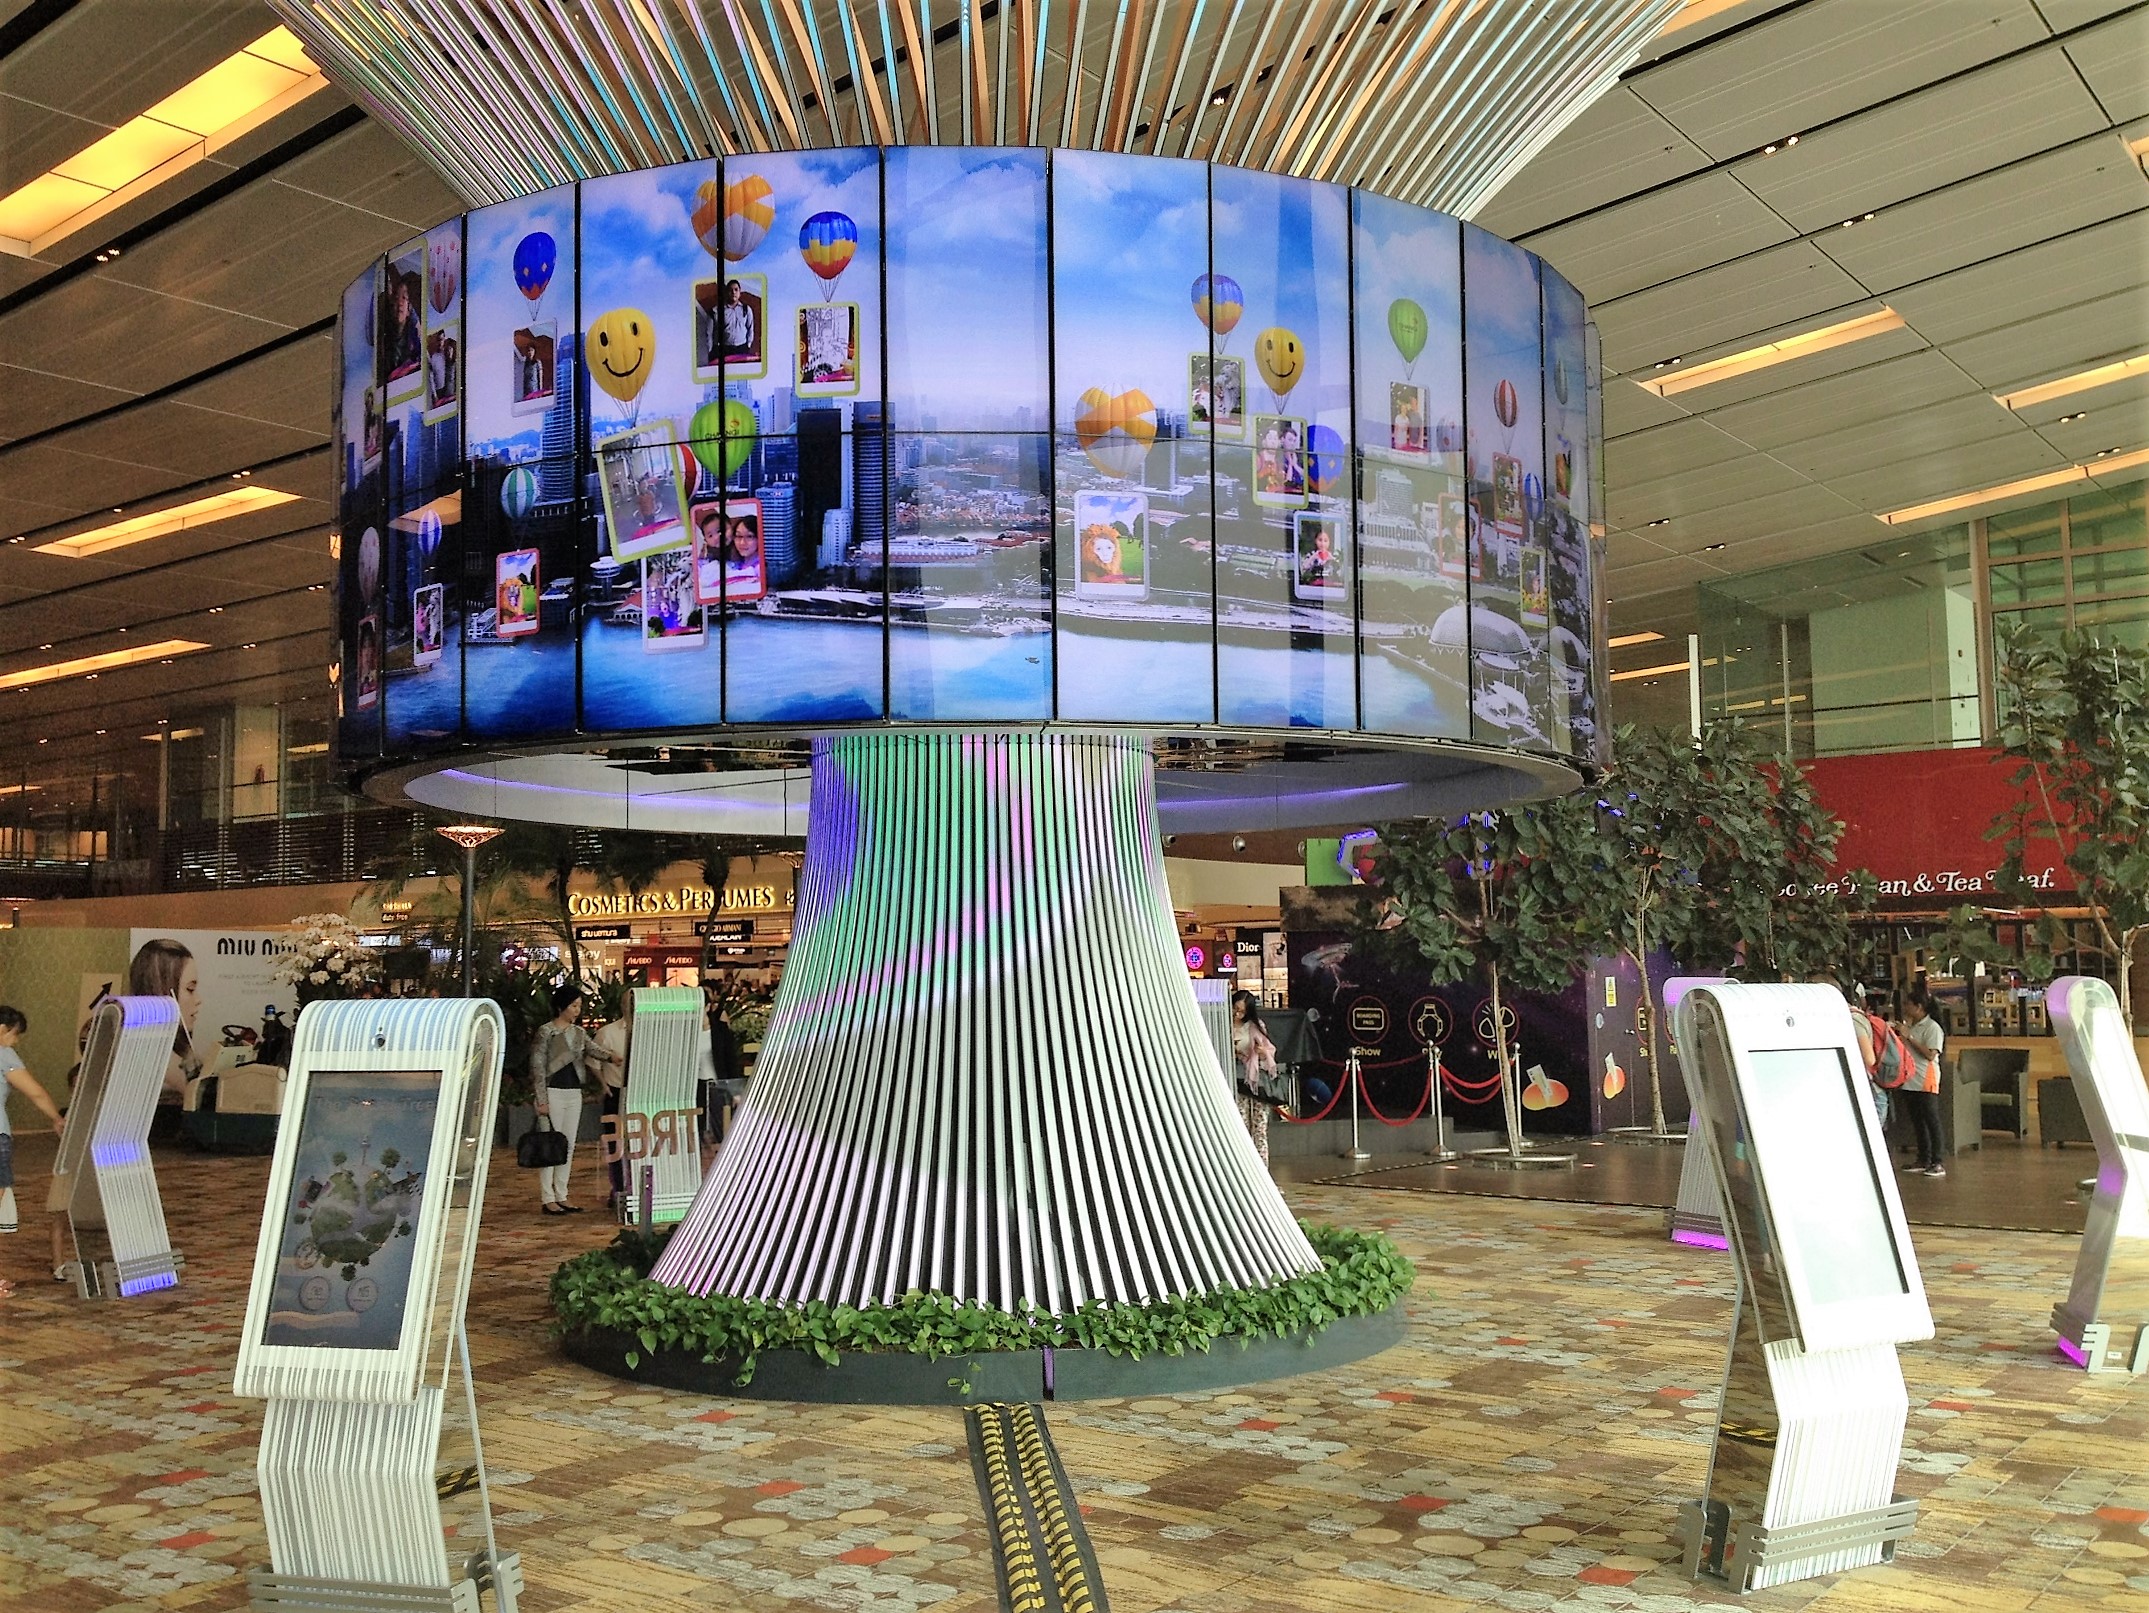 Digital art installations at Changi Airport aim to engage today’s connected travellers